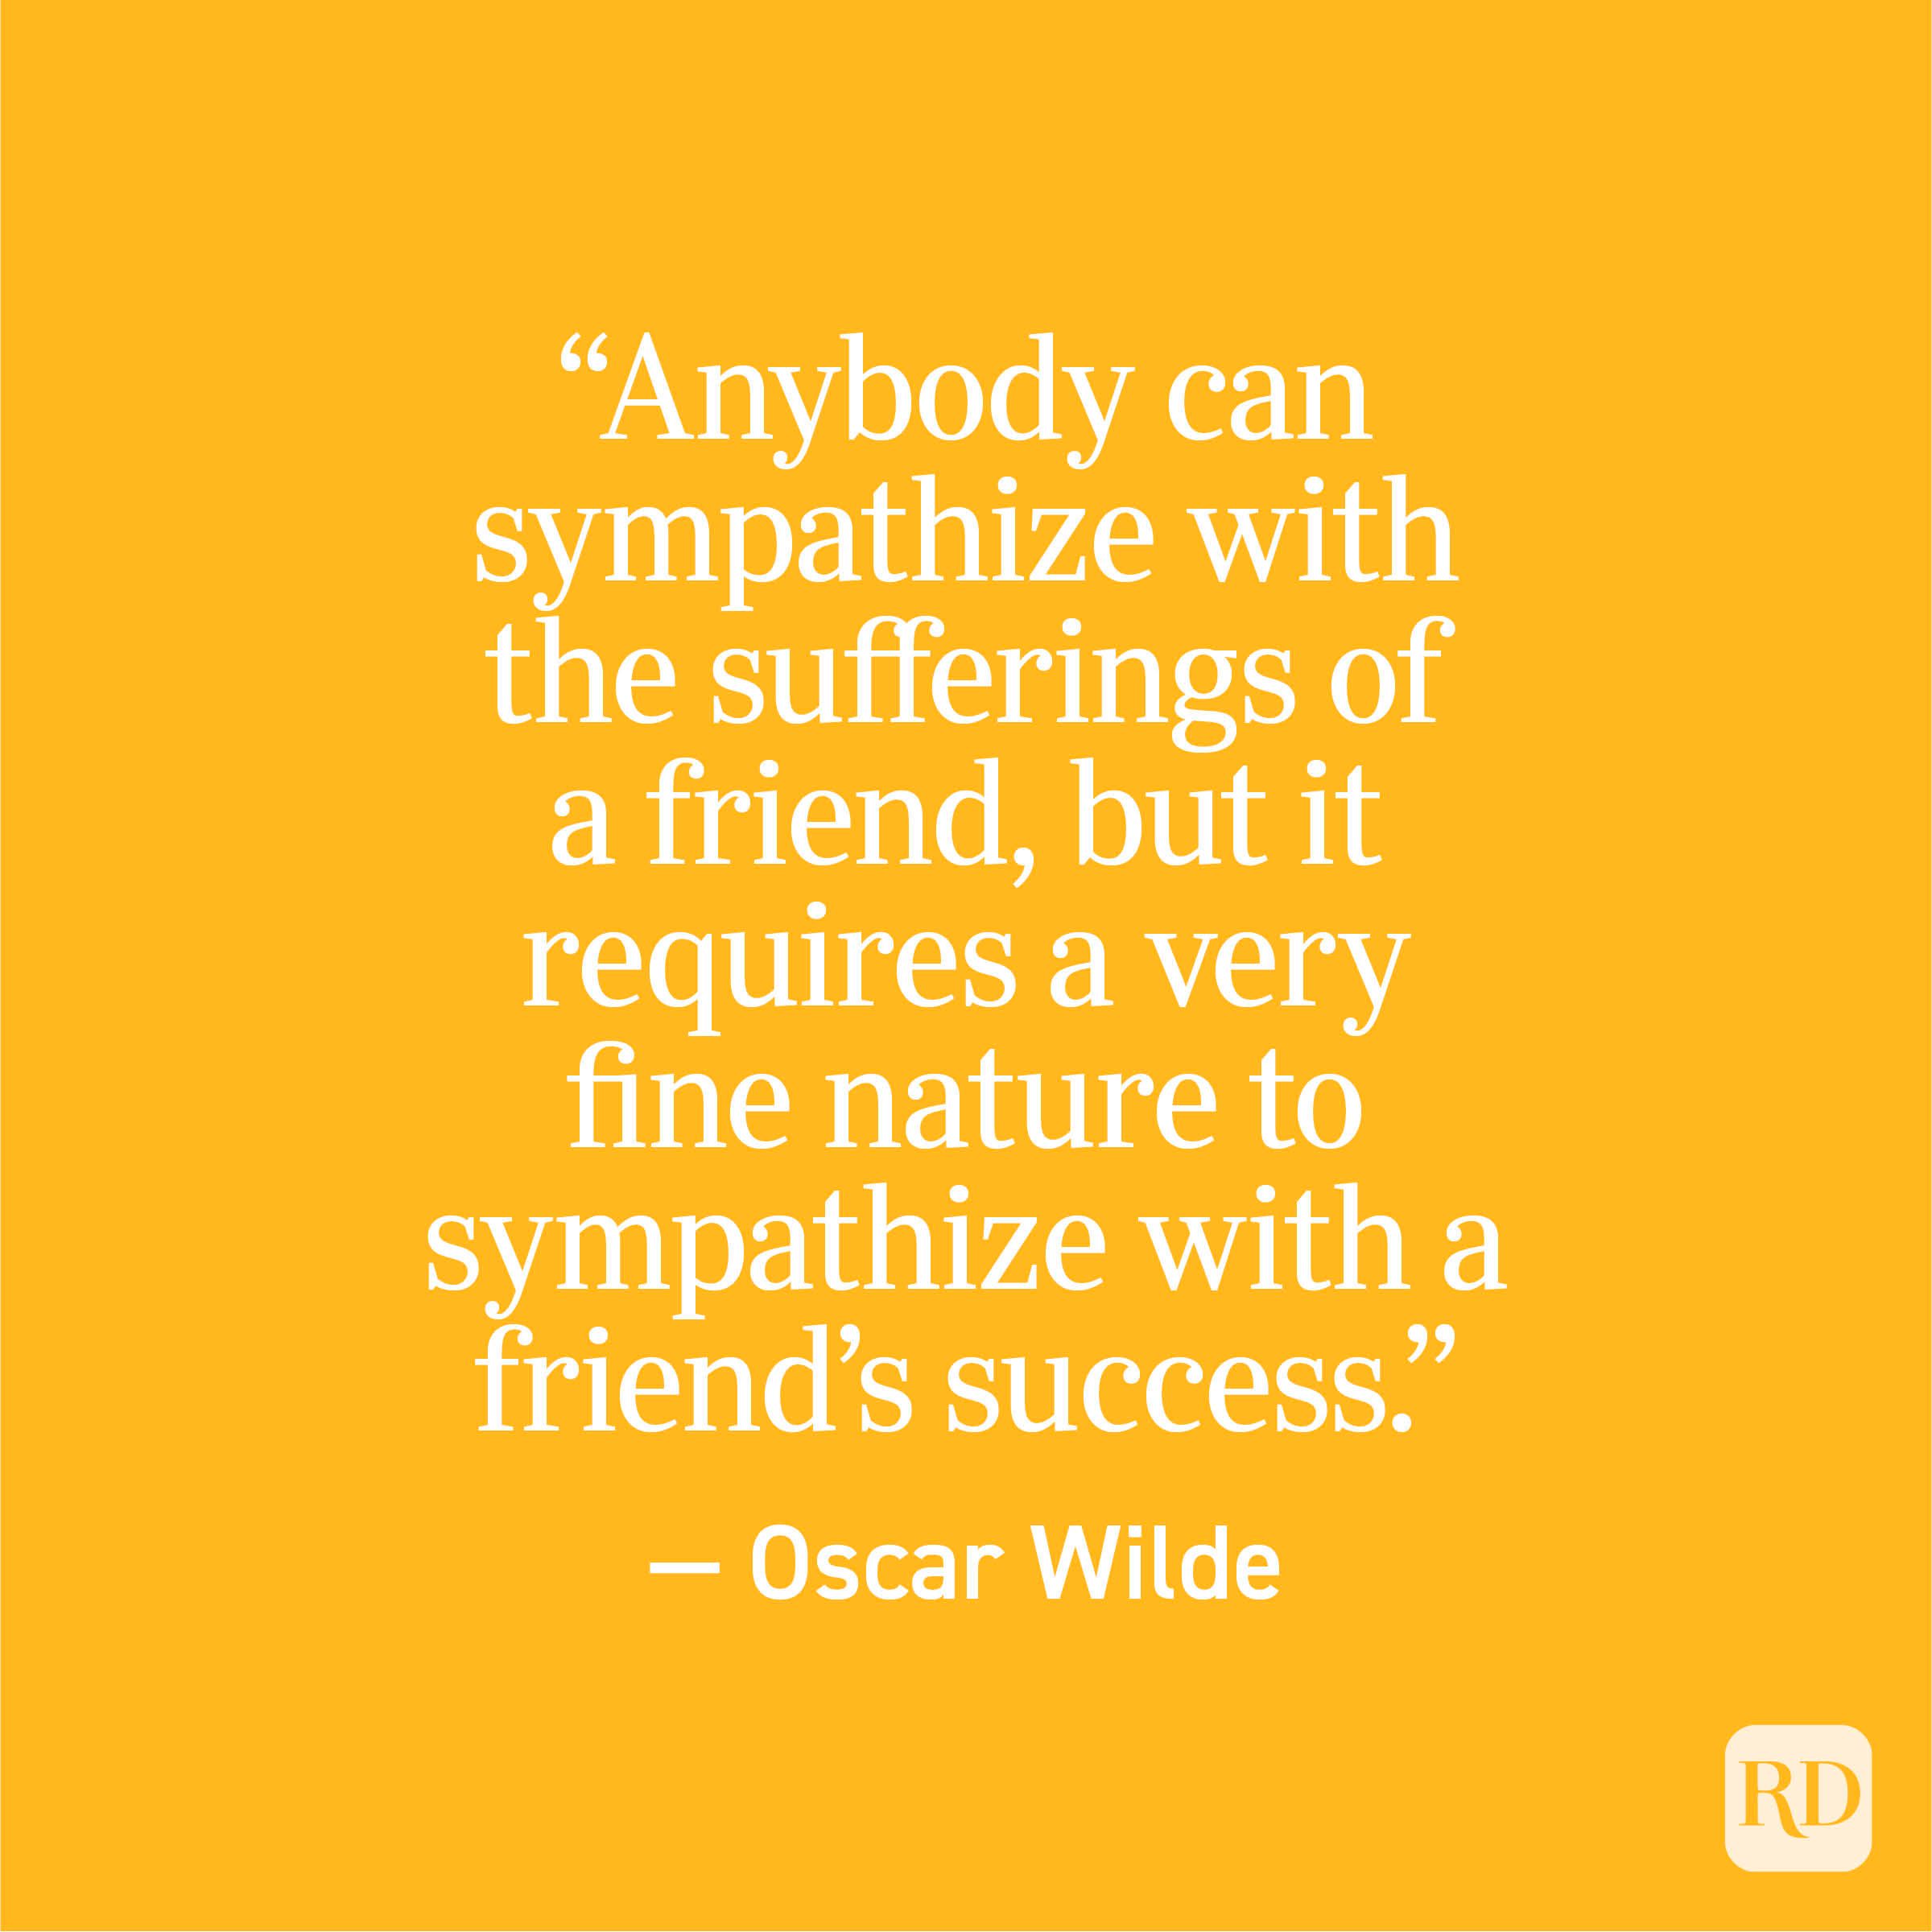 "Anybody can sympathize with the sufferings of a friend, but it requires a very fine nature to sympathize with a friend's success." - Oscar Wilde